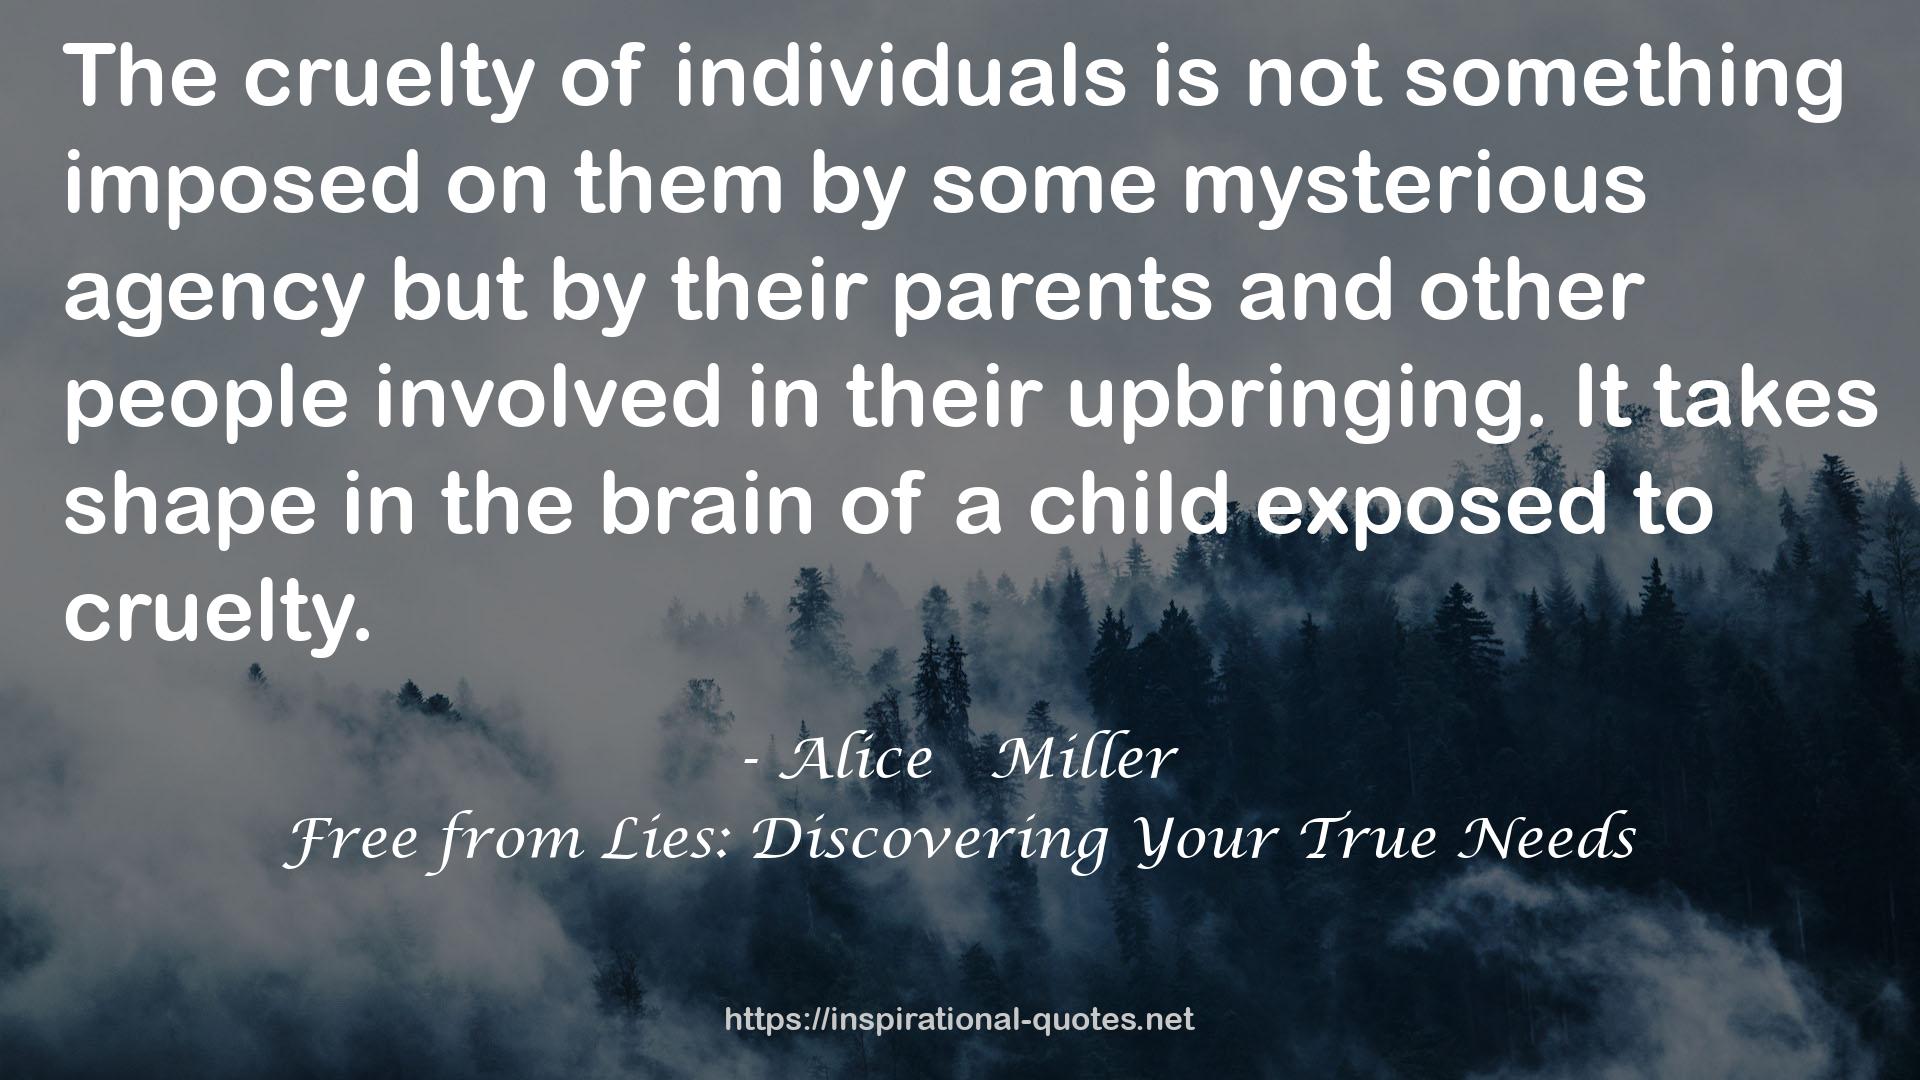 Free from Lies: Discovering Your True Needs QUOTES